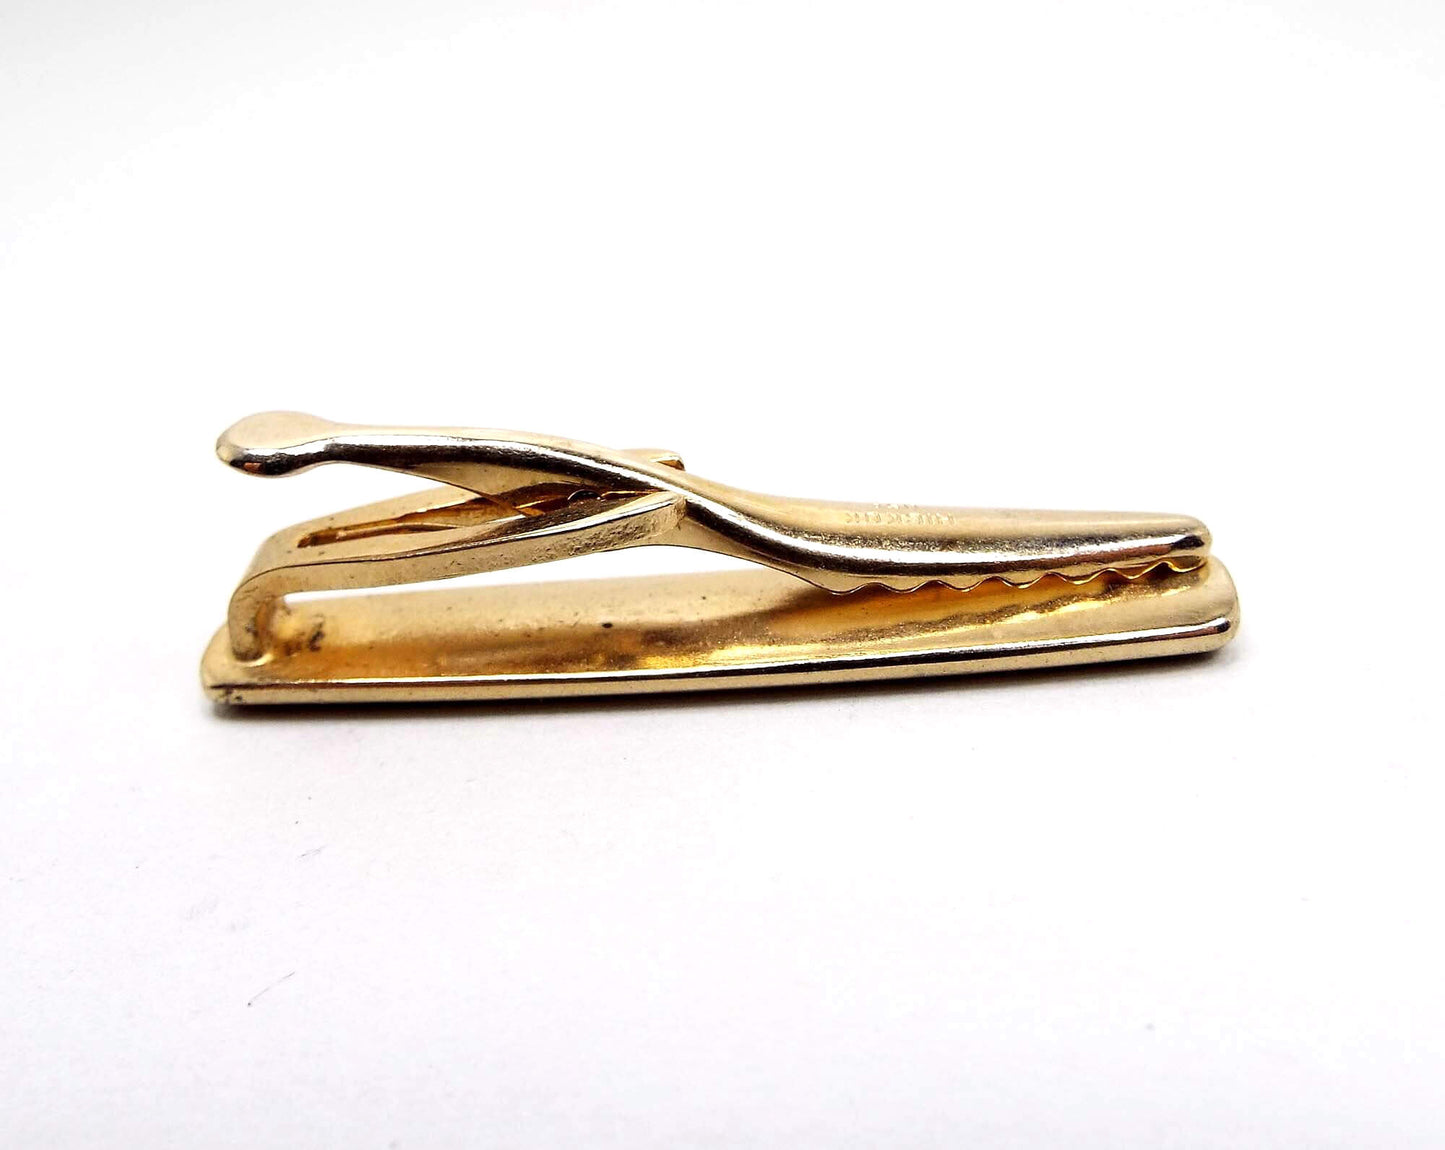 Hickok Rounded Rectangle Vintage Tie Clip Clasp